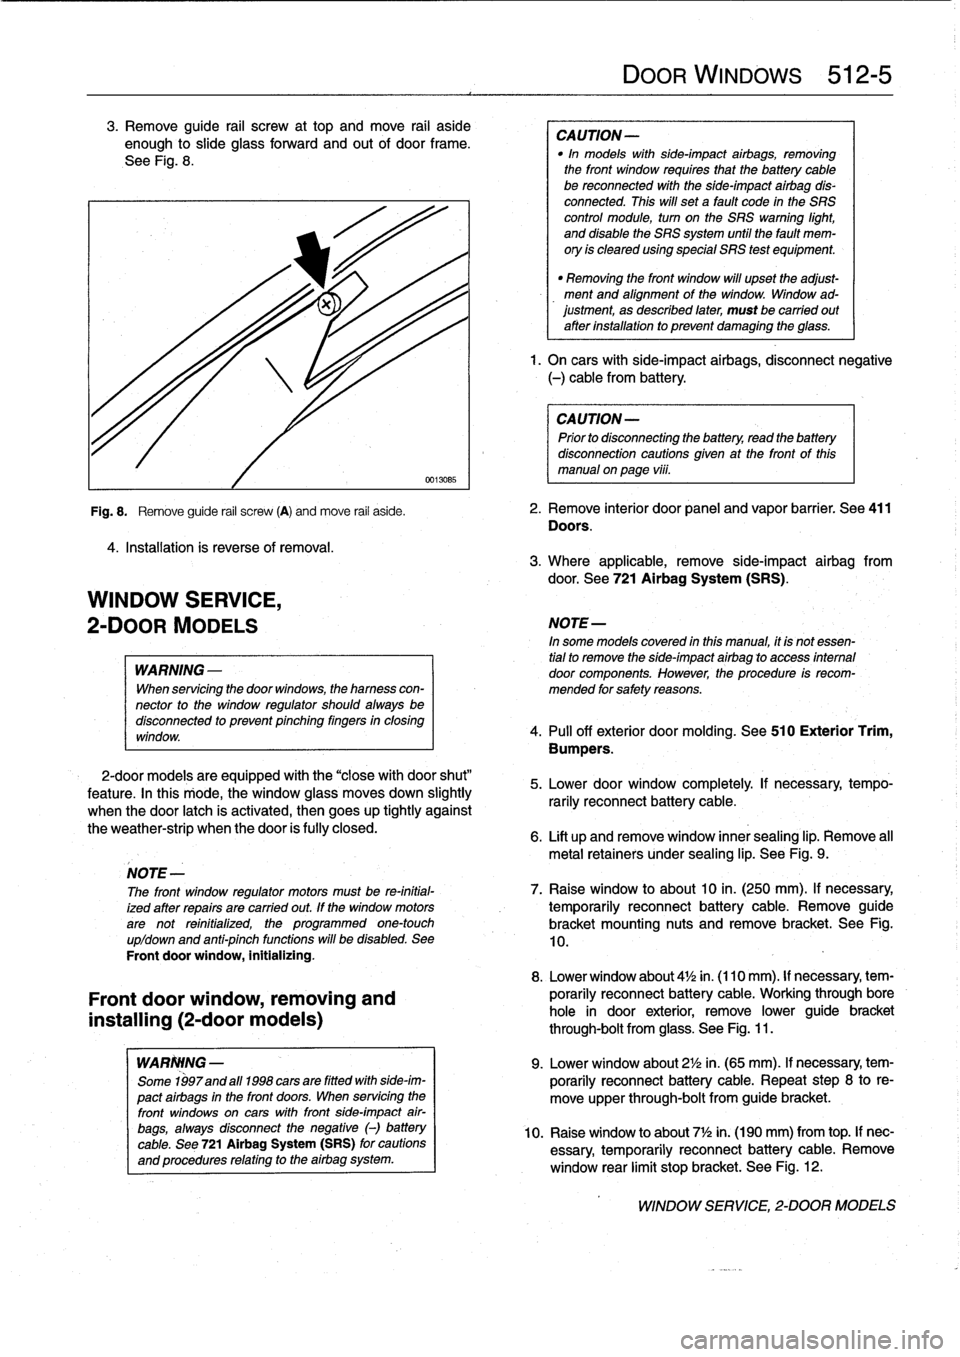 BMW 325i 1994 E36 User Guide 
3
.
Remove
guide
rail
screw
at
top
and
move
rail
aside
enough
to
slide
glass
forward
and
out
of
door
frame
.

See
Fig
.
8
.

4
.
Installation
is
reverse
of
removal
.

WINDOW
SERVICE,

2-DOOR
MODELS

